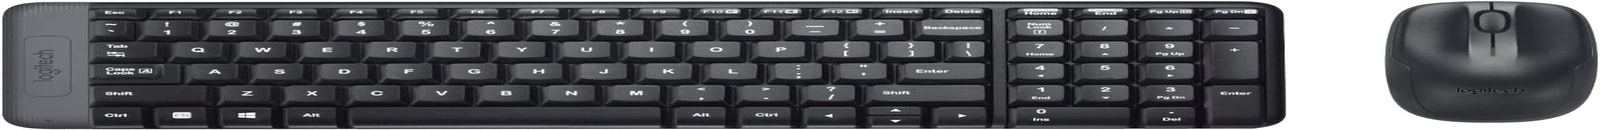 Logitech MK220 Compact Wireless Keyboard and Mouse Combo for Windows, 2.4 Ghz Wi